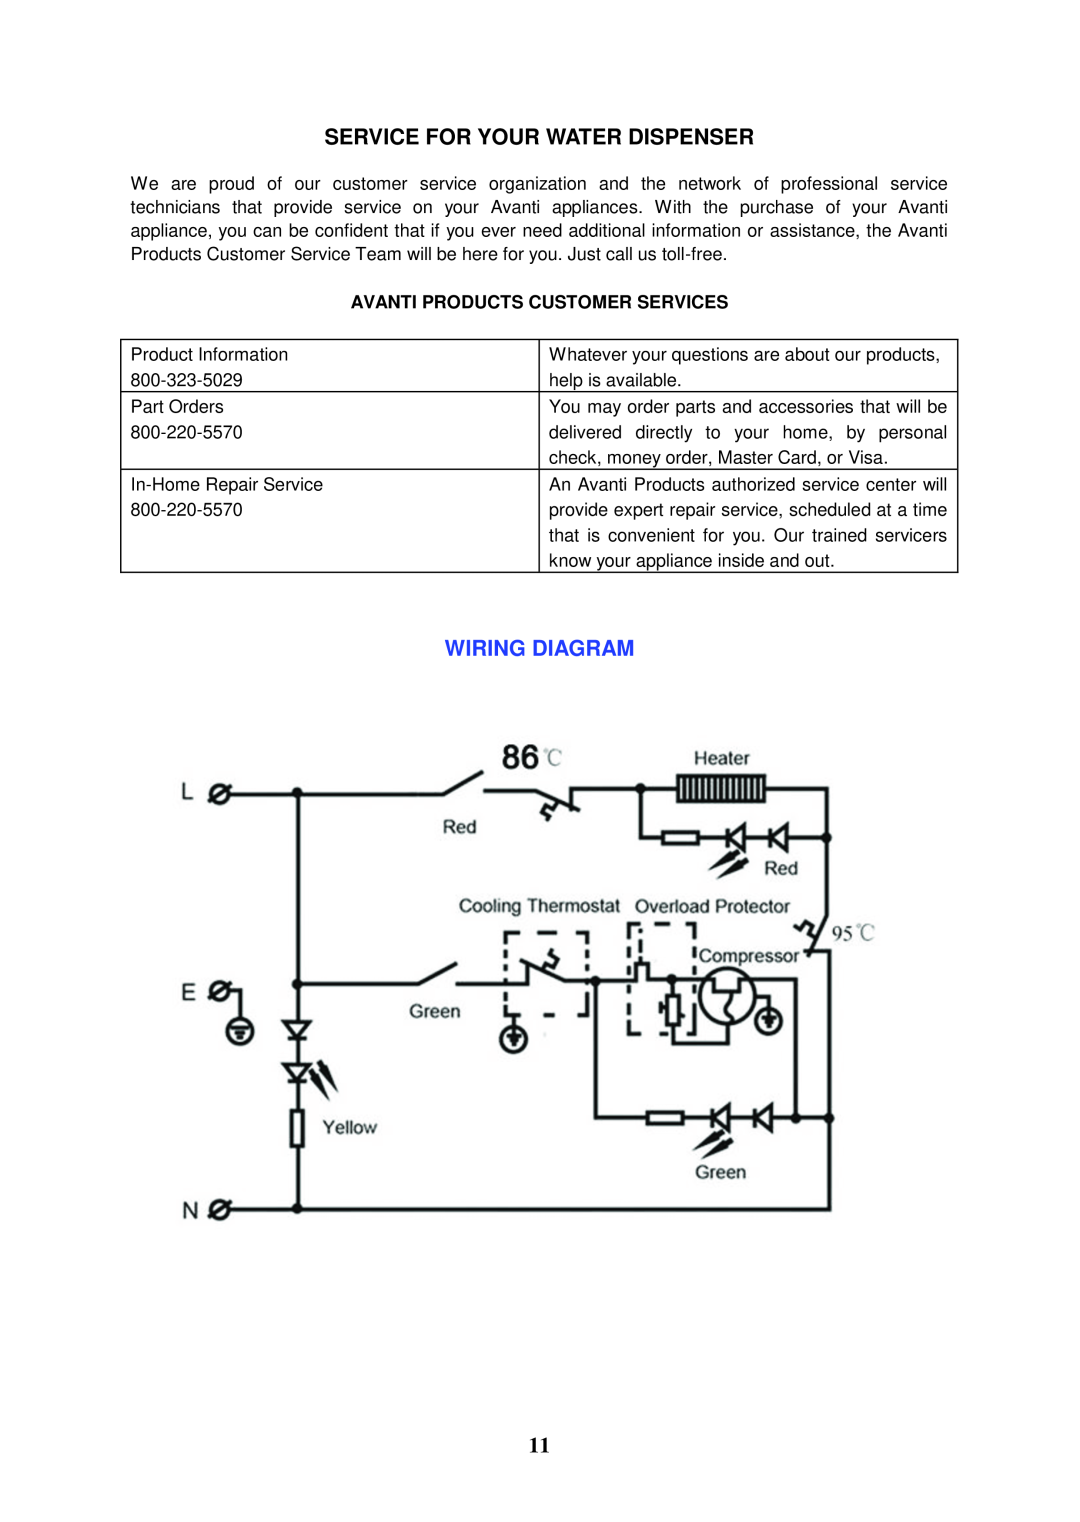 Avanti WDTZ000 instruction manual Wiring Diagram, Service For Your Water Dispenser, Avanti Products Customer Services 